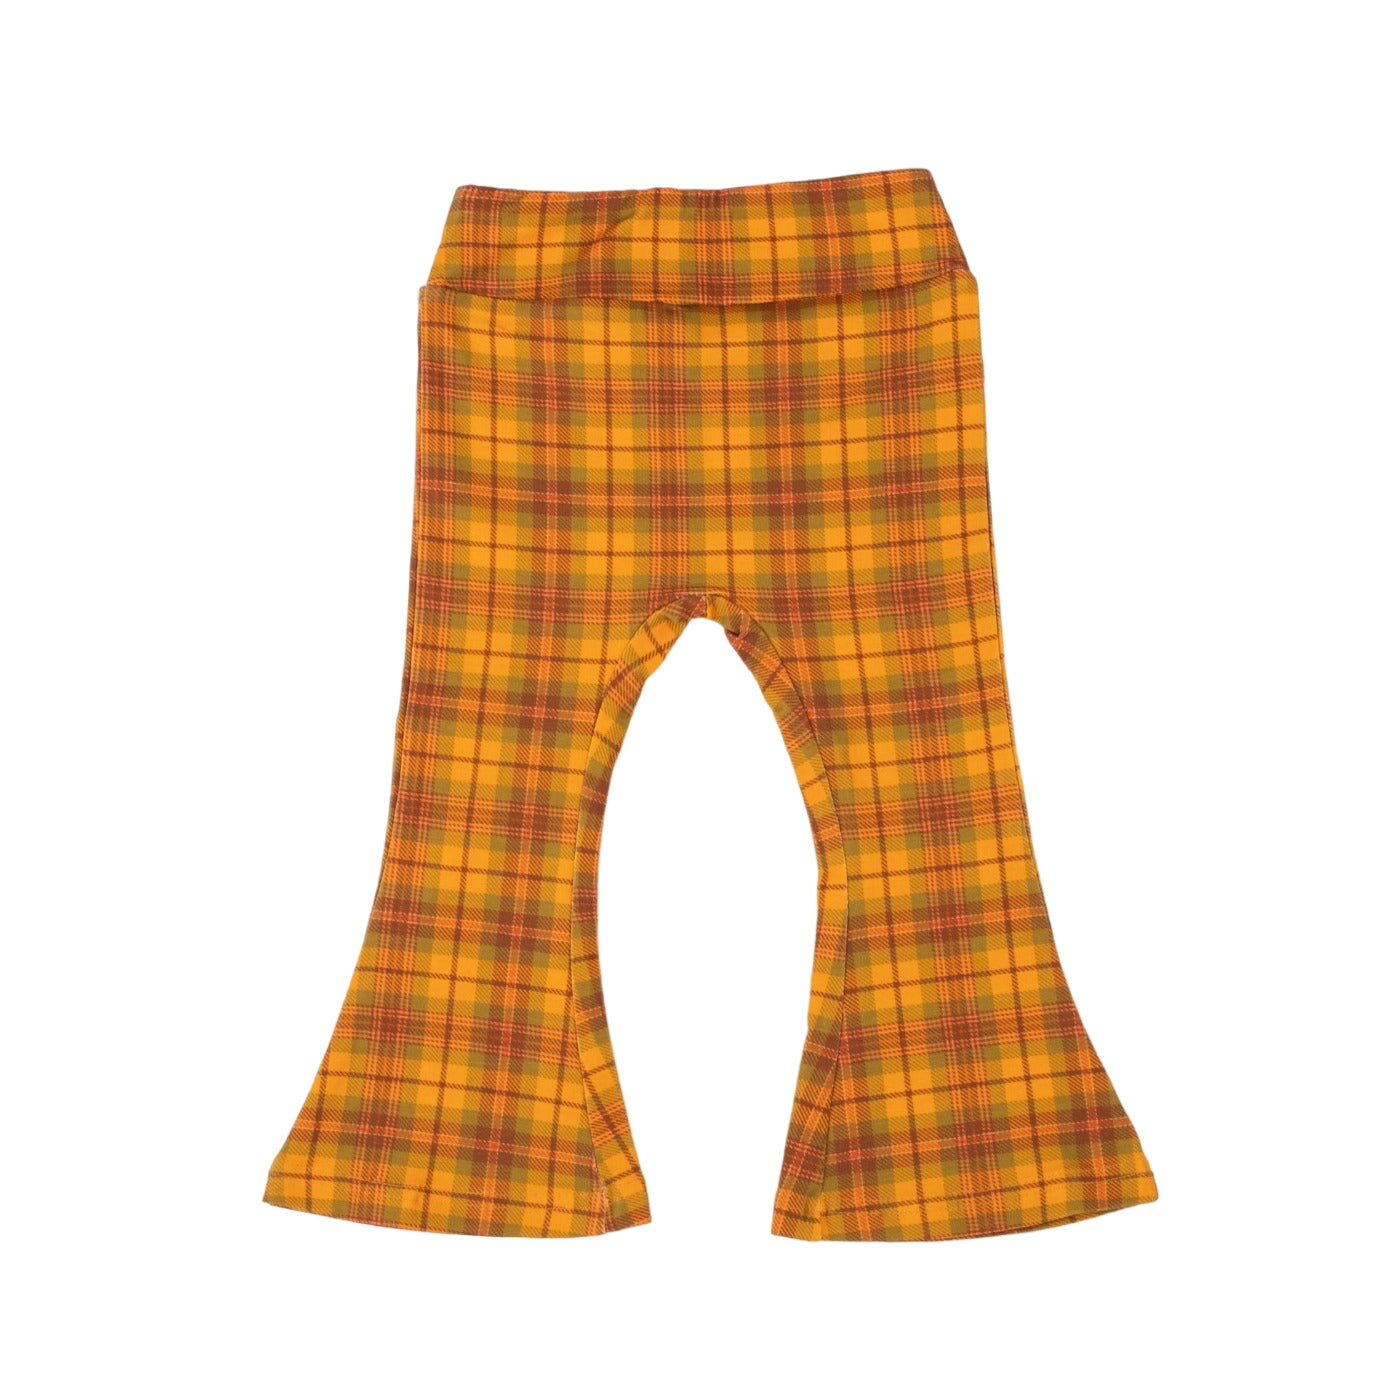 Plaid Jersey Bell Bottoms Flare Pants For Babies, Toddlers And Girls